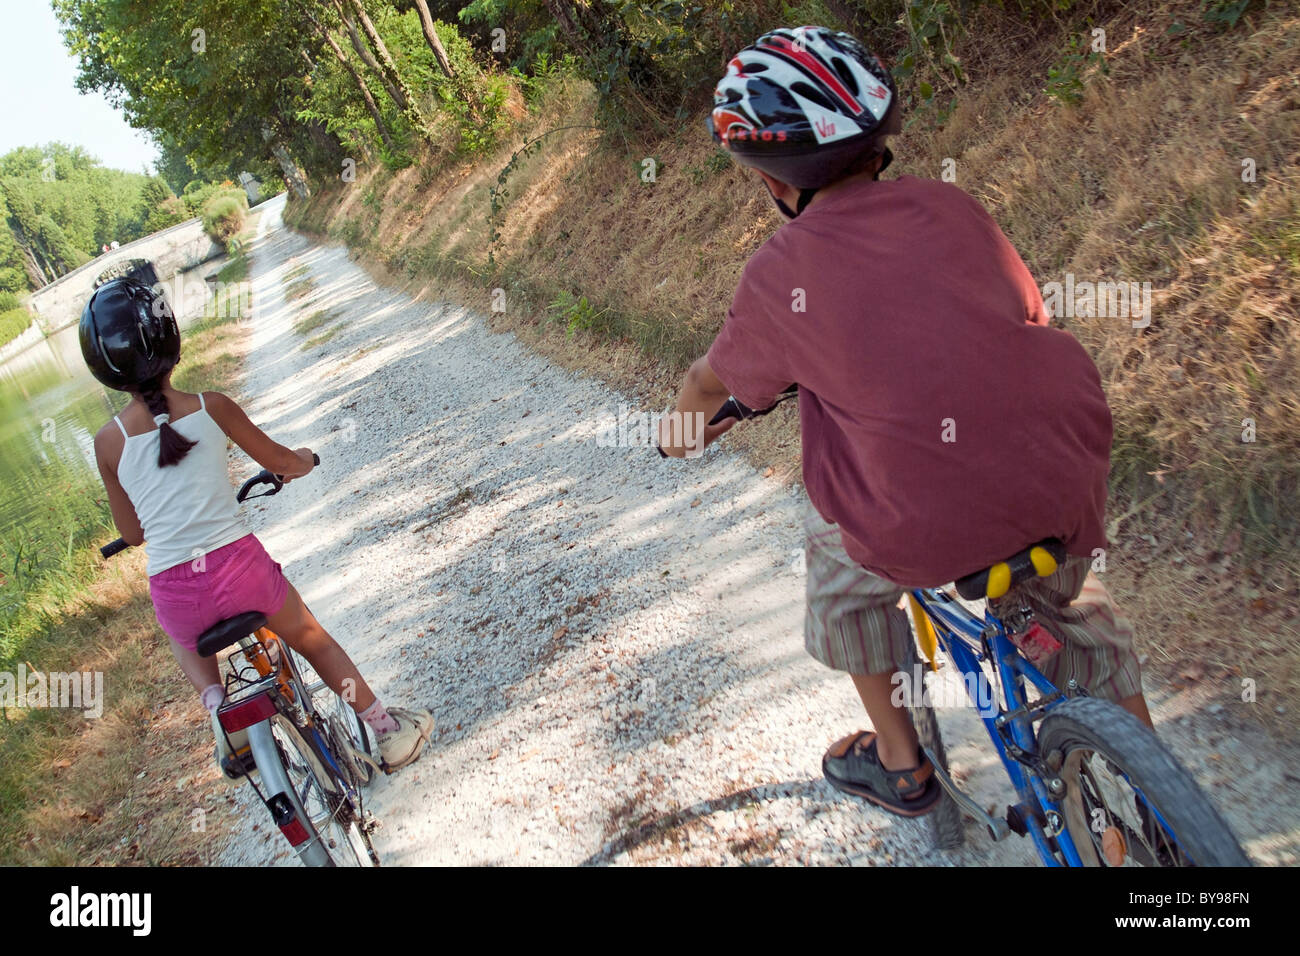 Young boy and girl biking side by side, Carcassonne, Canal du Midi, France. Stock Photo